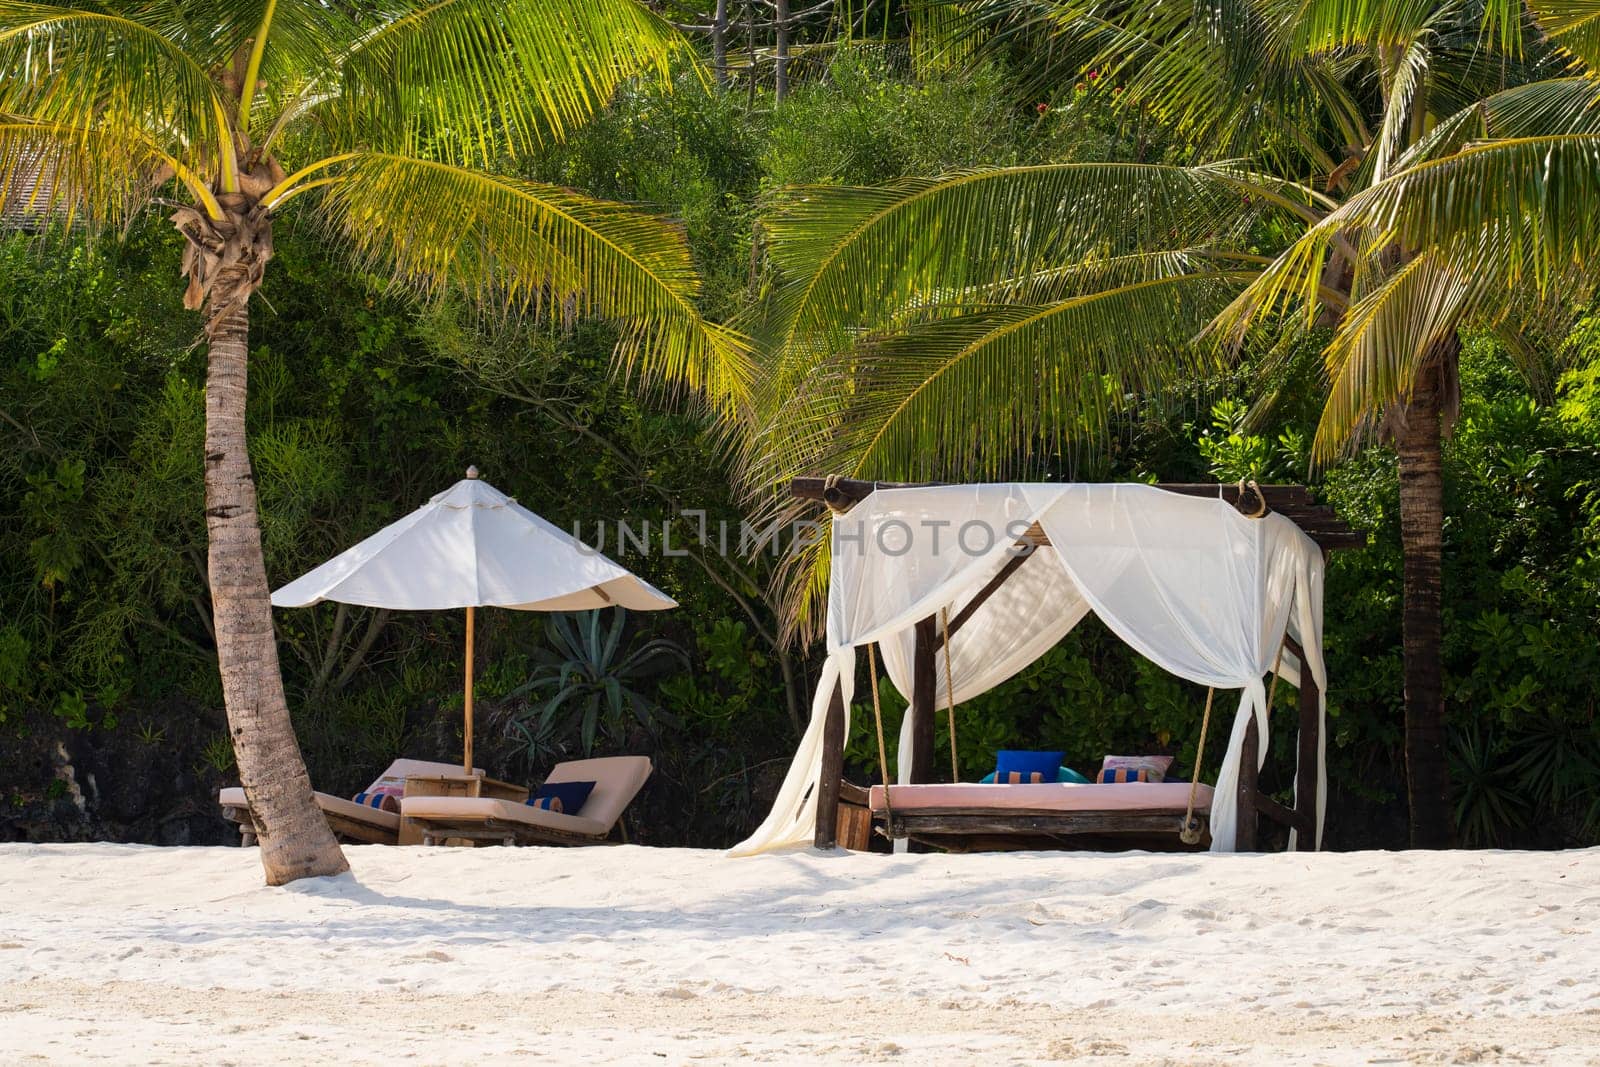 White beach canopies and beach parasol at sunset.Luxury beach tents at luxurious beach resort. Summer beach concept, carefree, rest seaside, Nobody on the beach.Garden on the back.